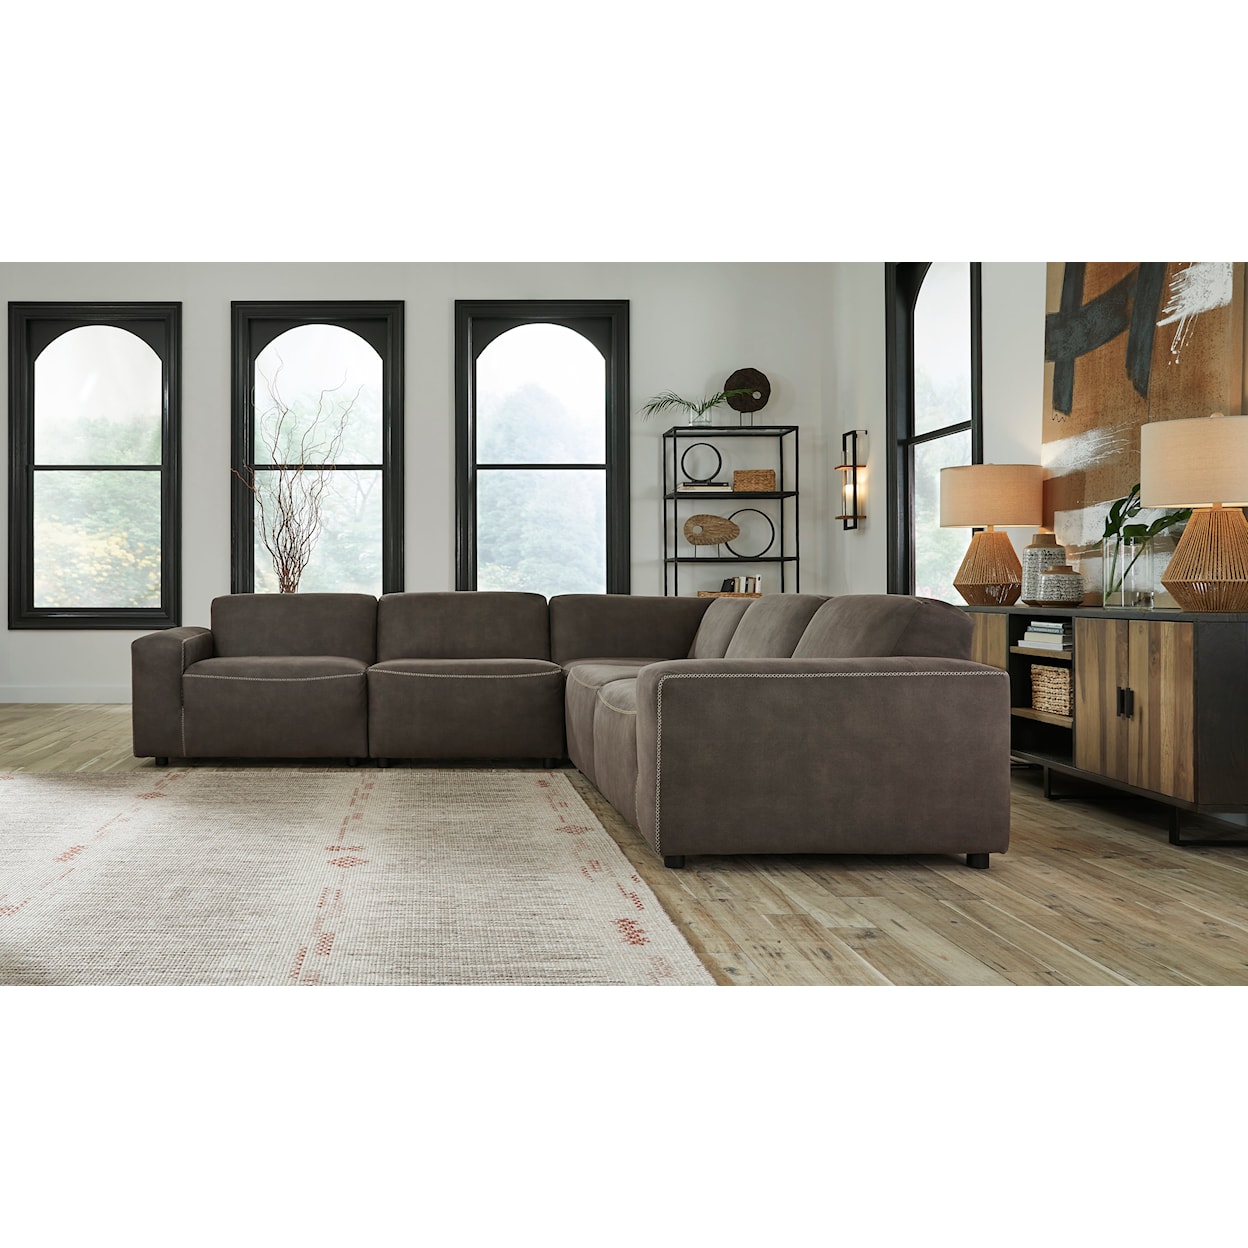 Benchcraft Allena 5-Piece Sectional